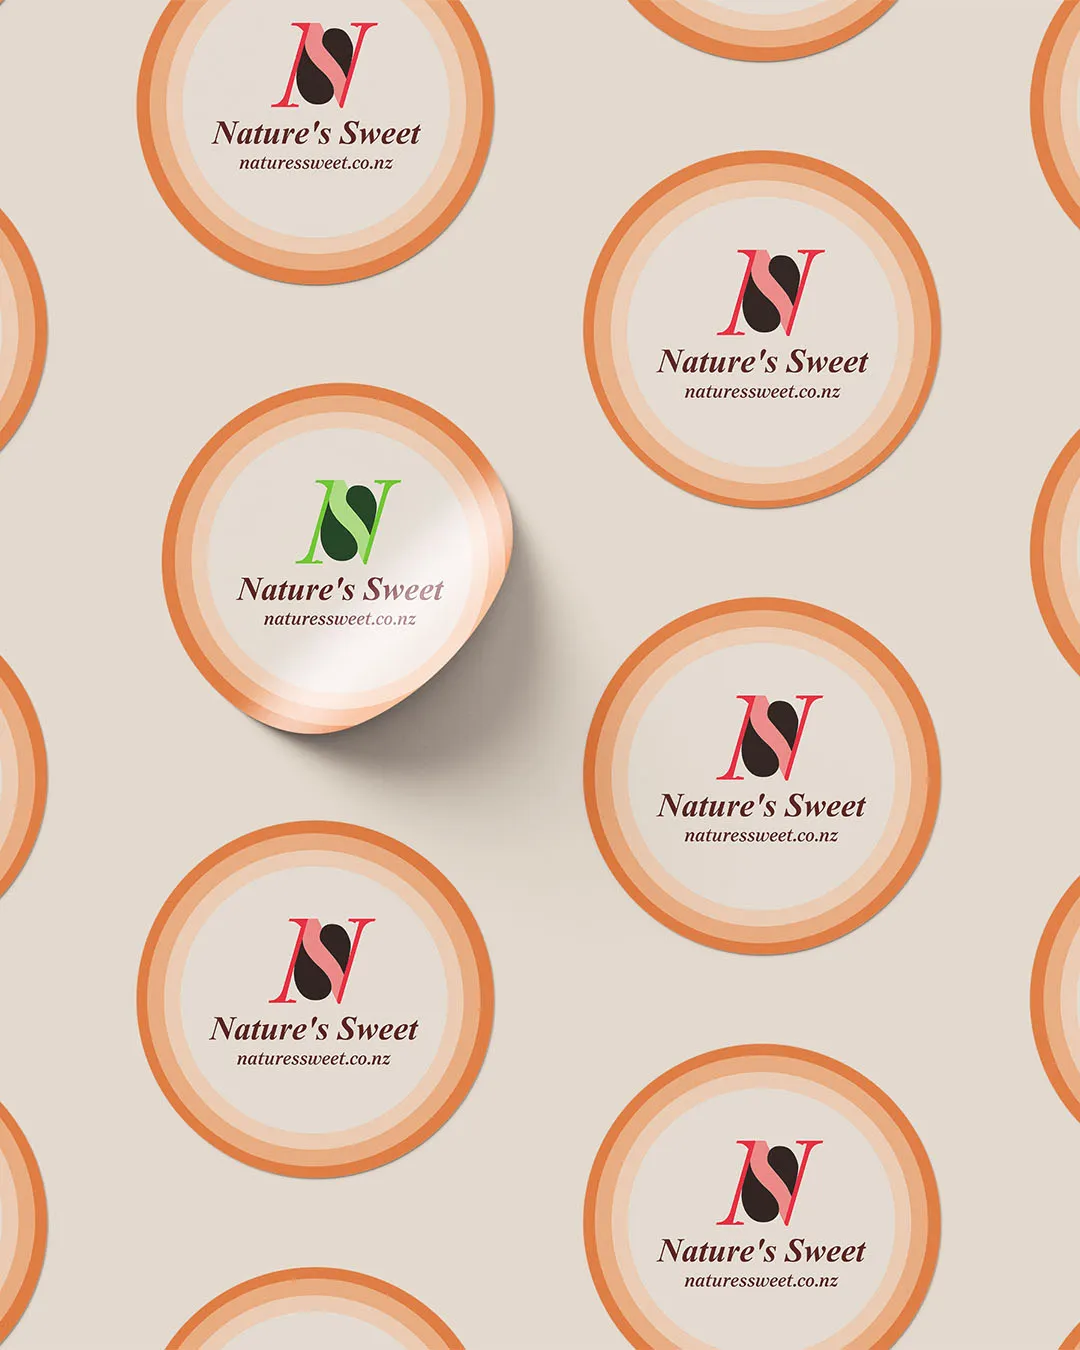 The Natures Sweet logo displayed on an array of stickers